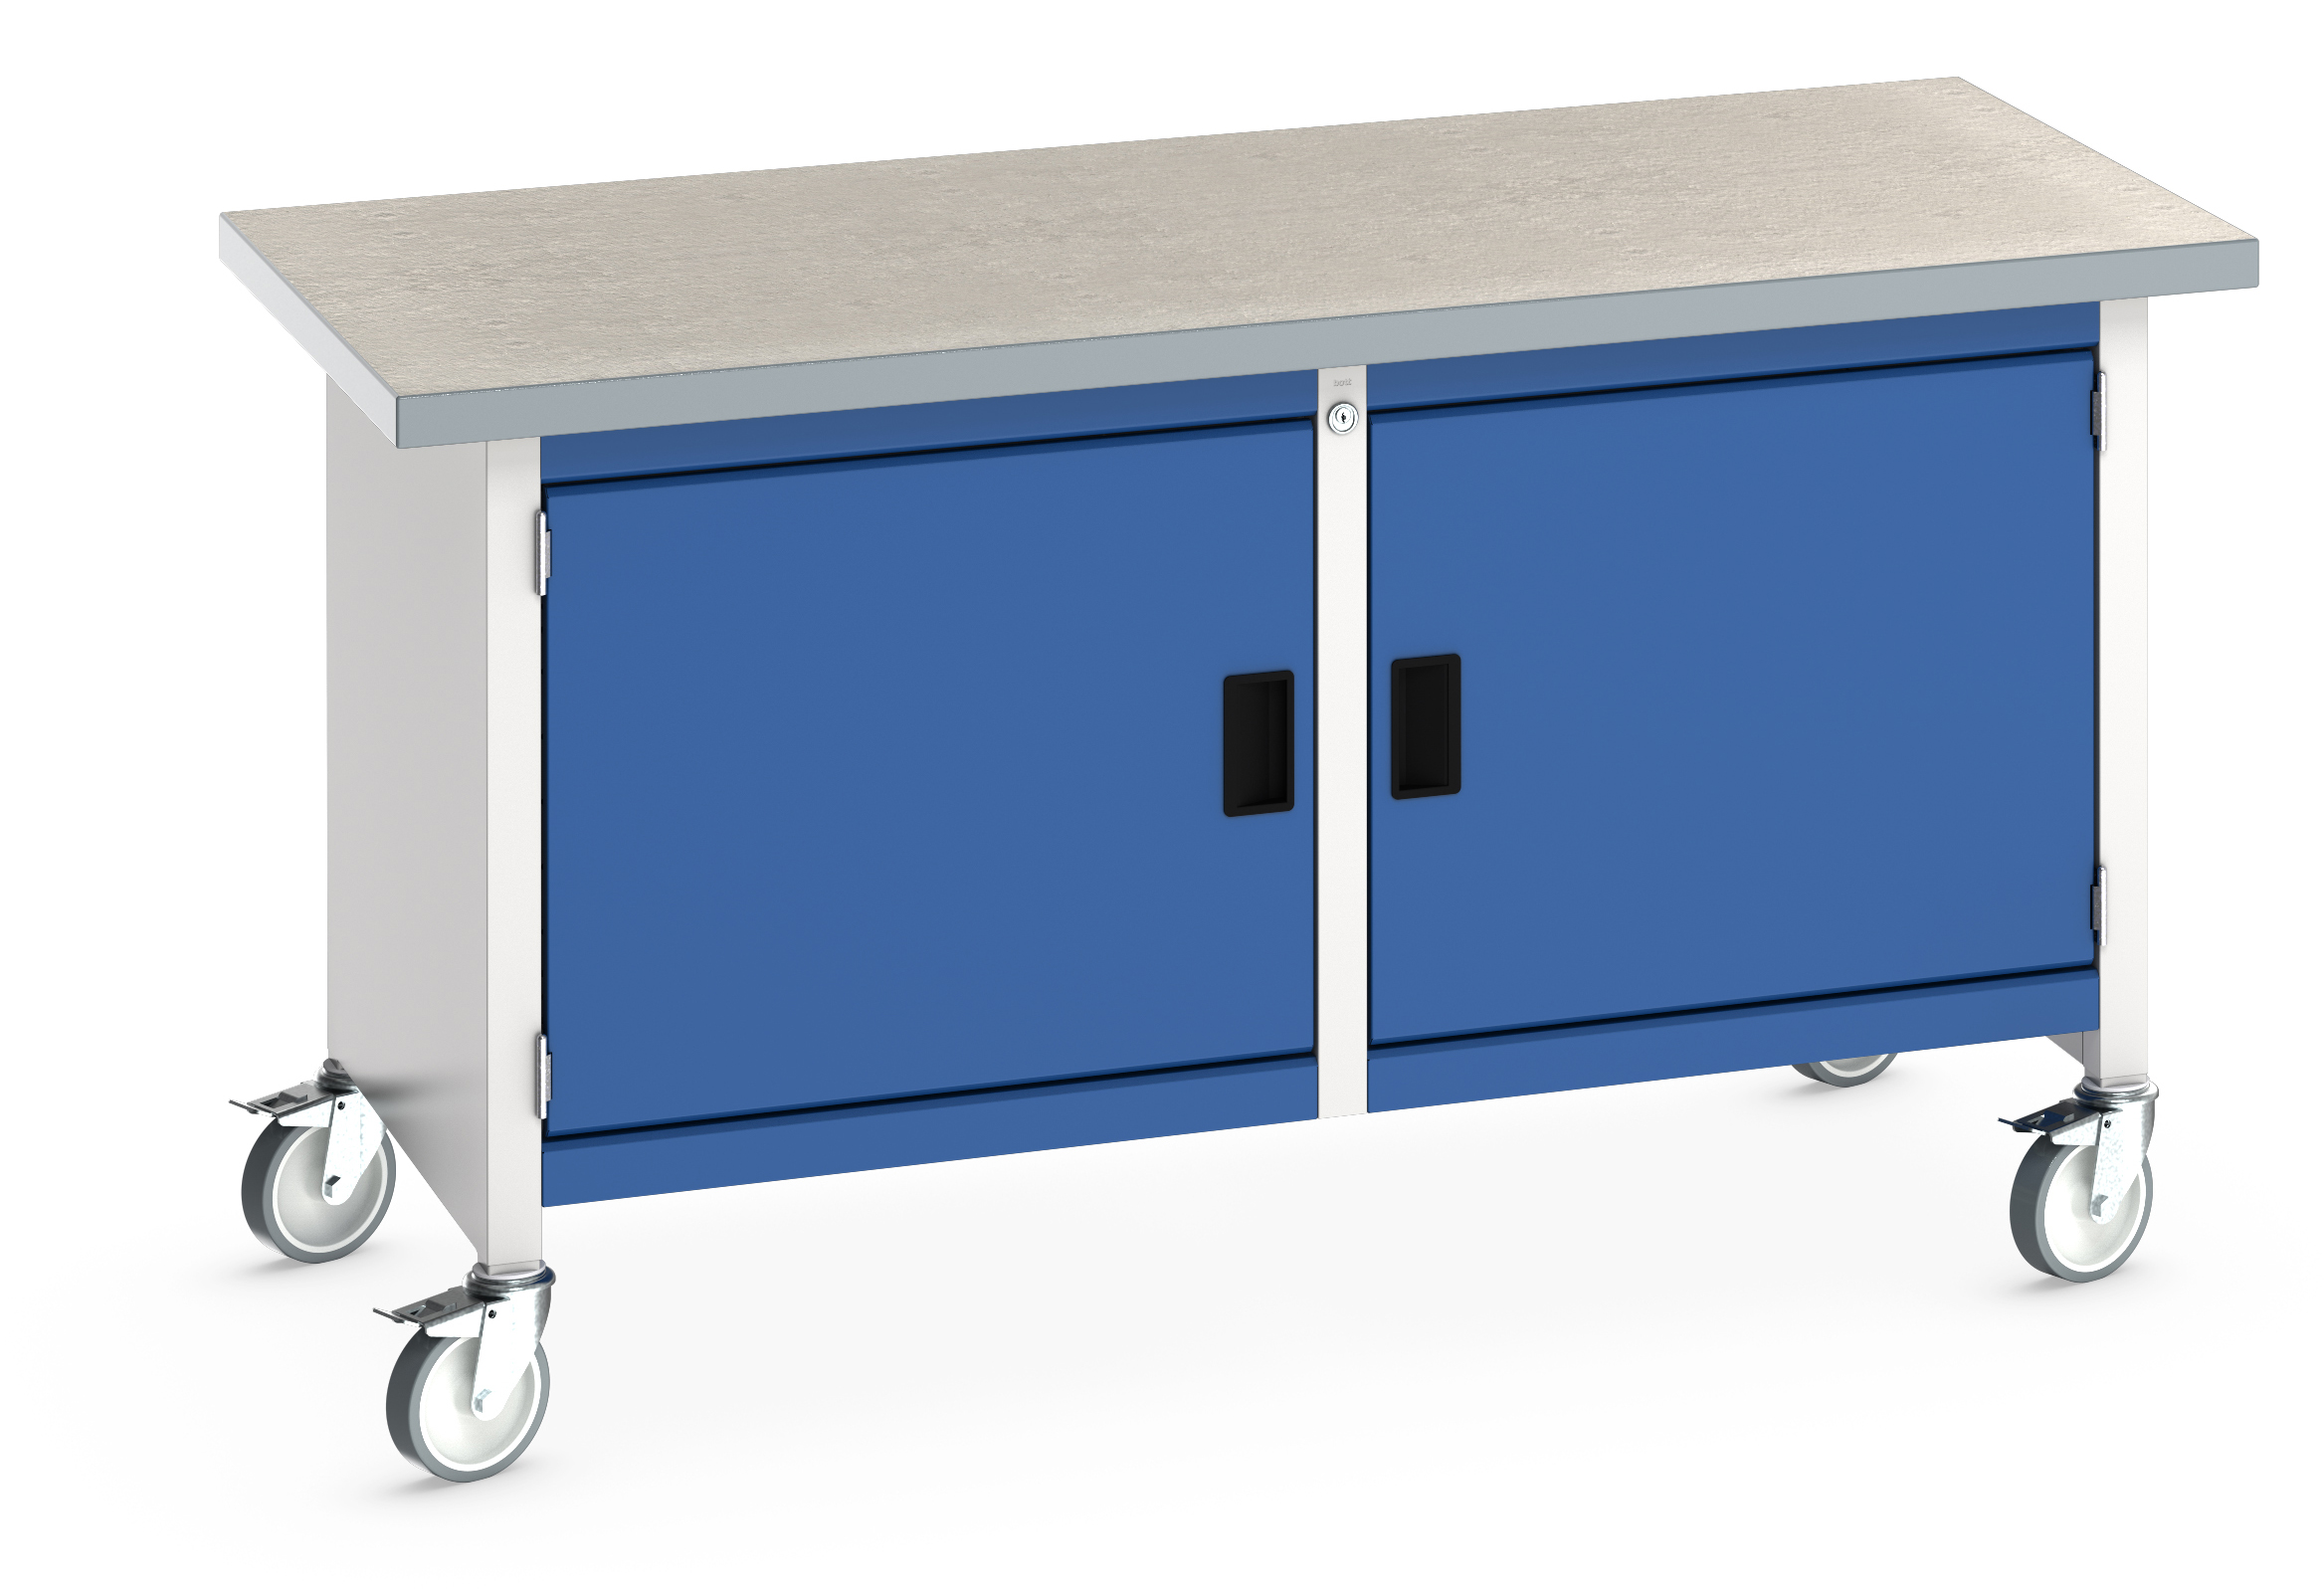 Bott Cubio Mobile Storage Bench With Full Cupboard / Full Cupboard - 41002099.11V